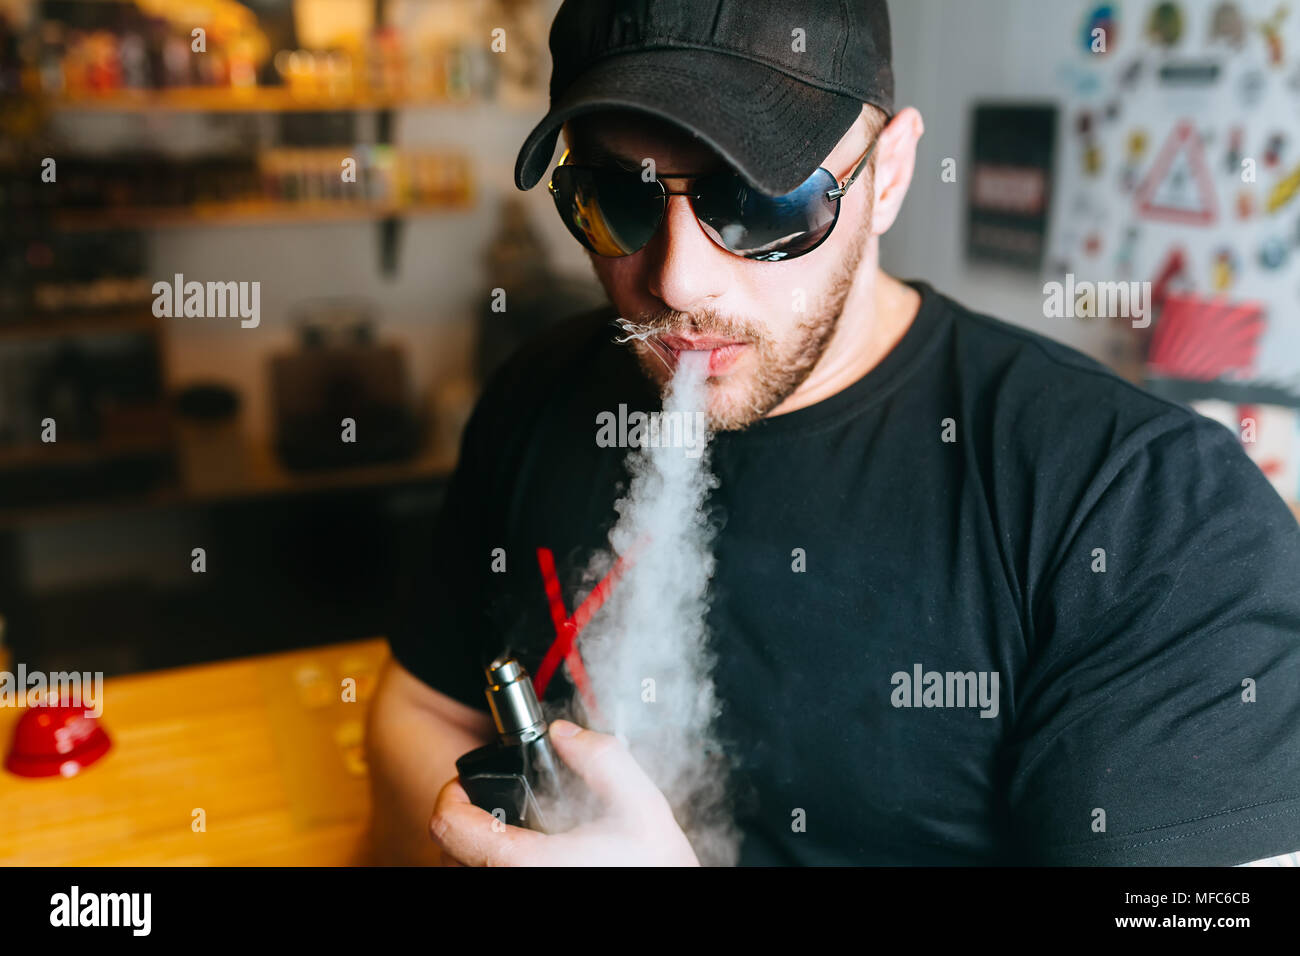 Brutal bearded man in sunglasses smoke an electronic cigarette and releases clouds of vapor at the vape shop. Stock Photo